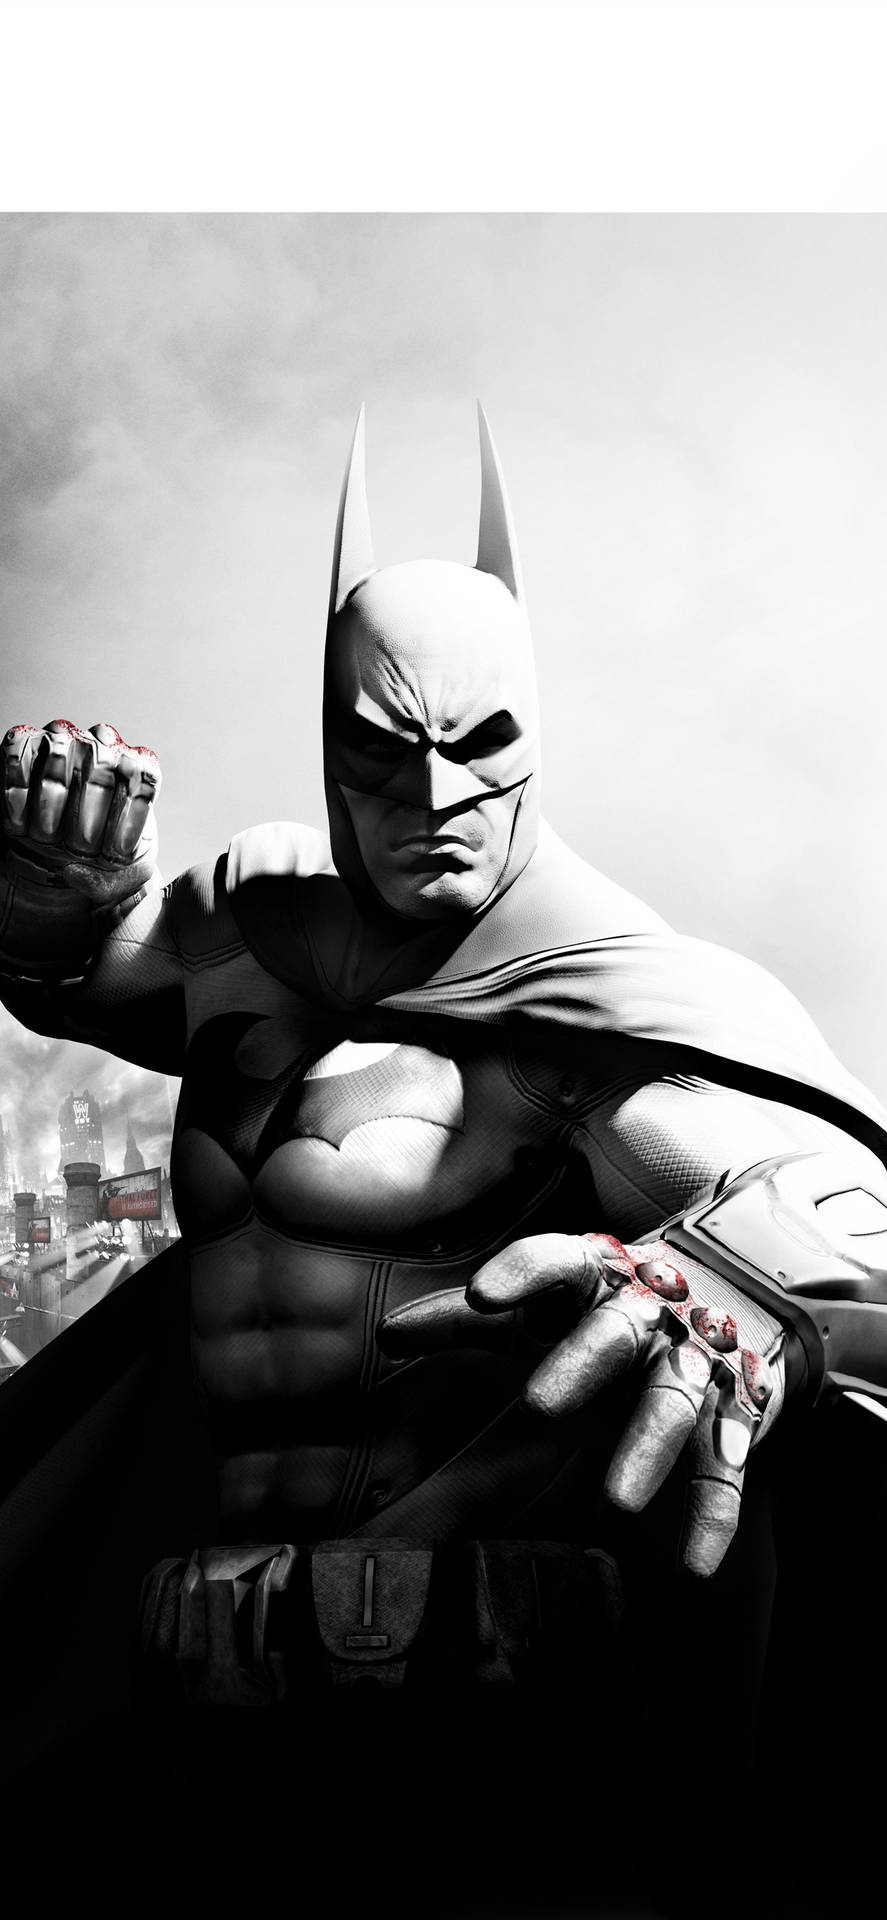 Batman Arkham Iphone With Bloodied Knuckles Background